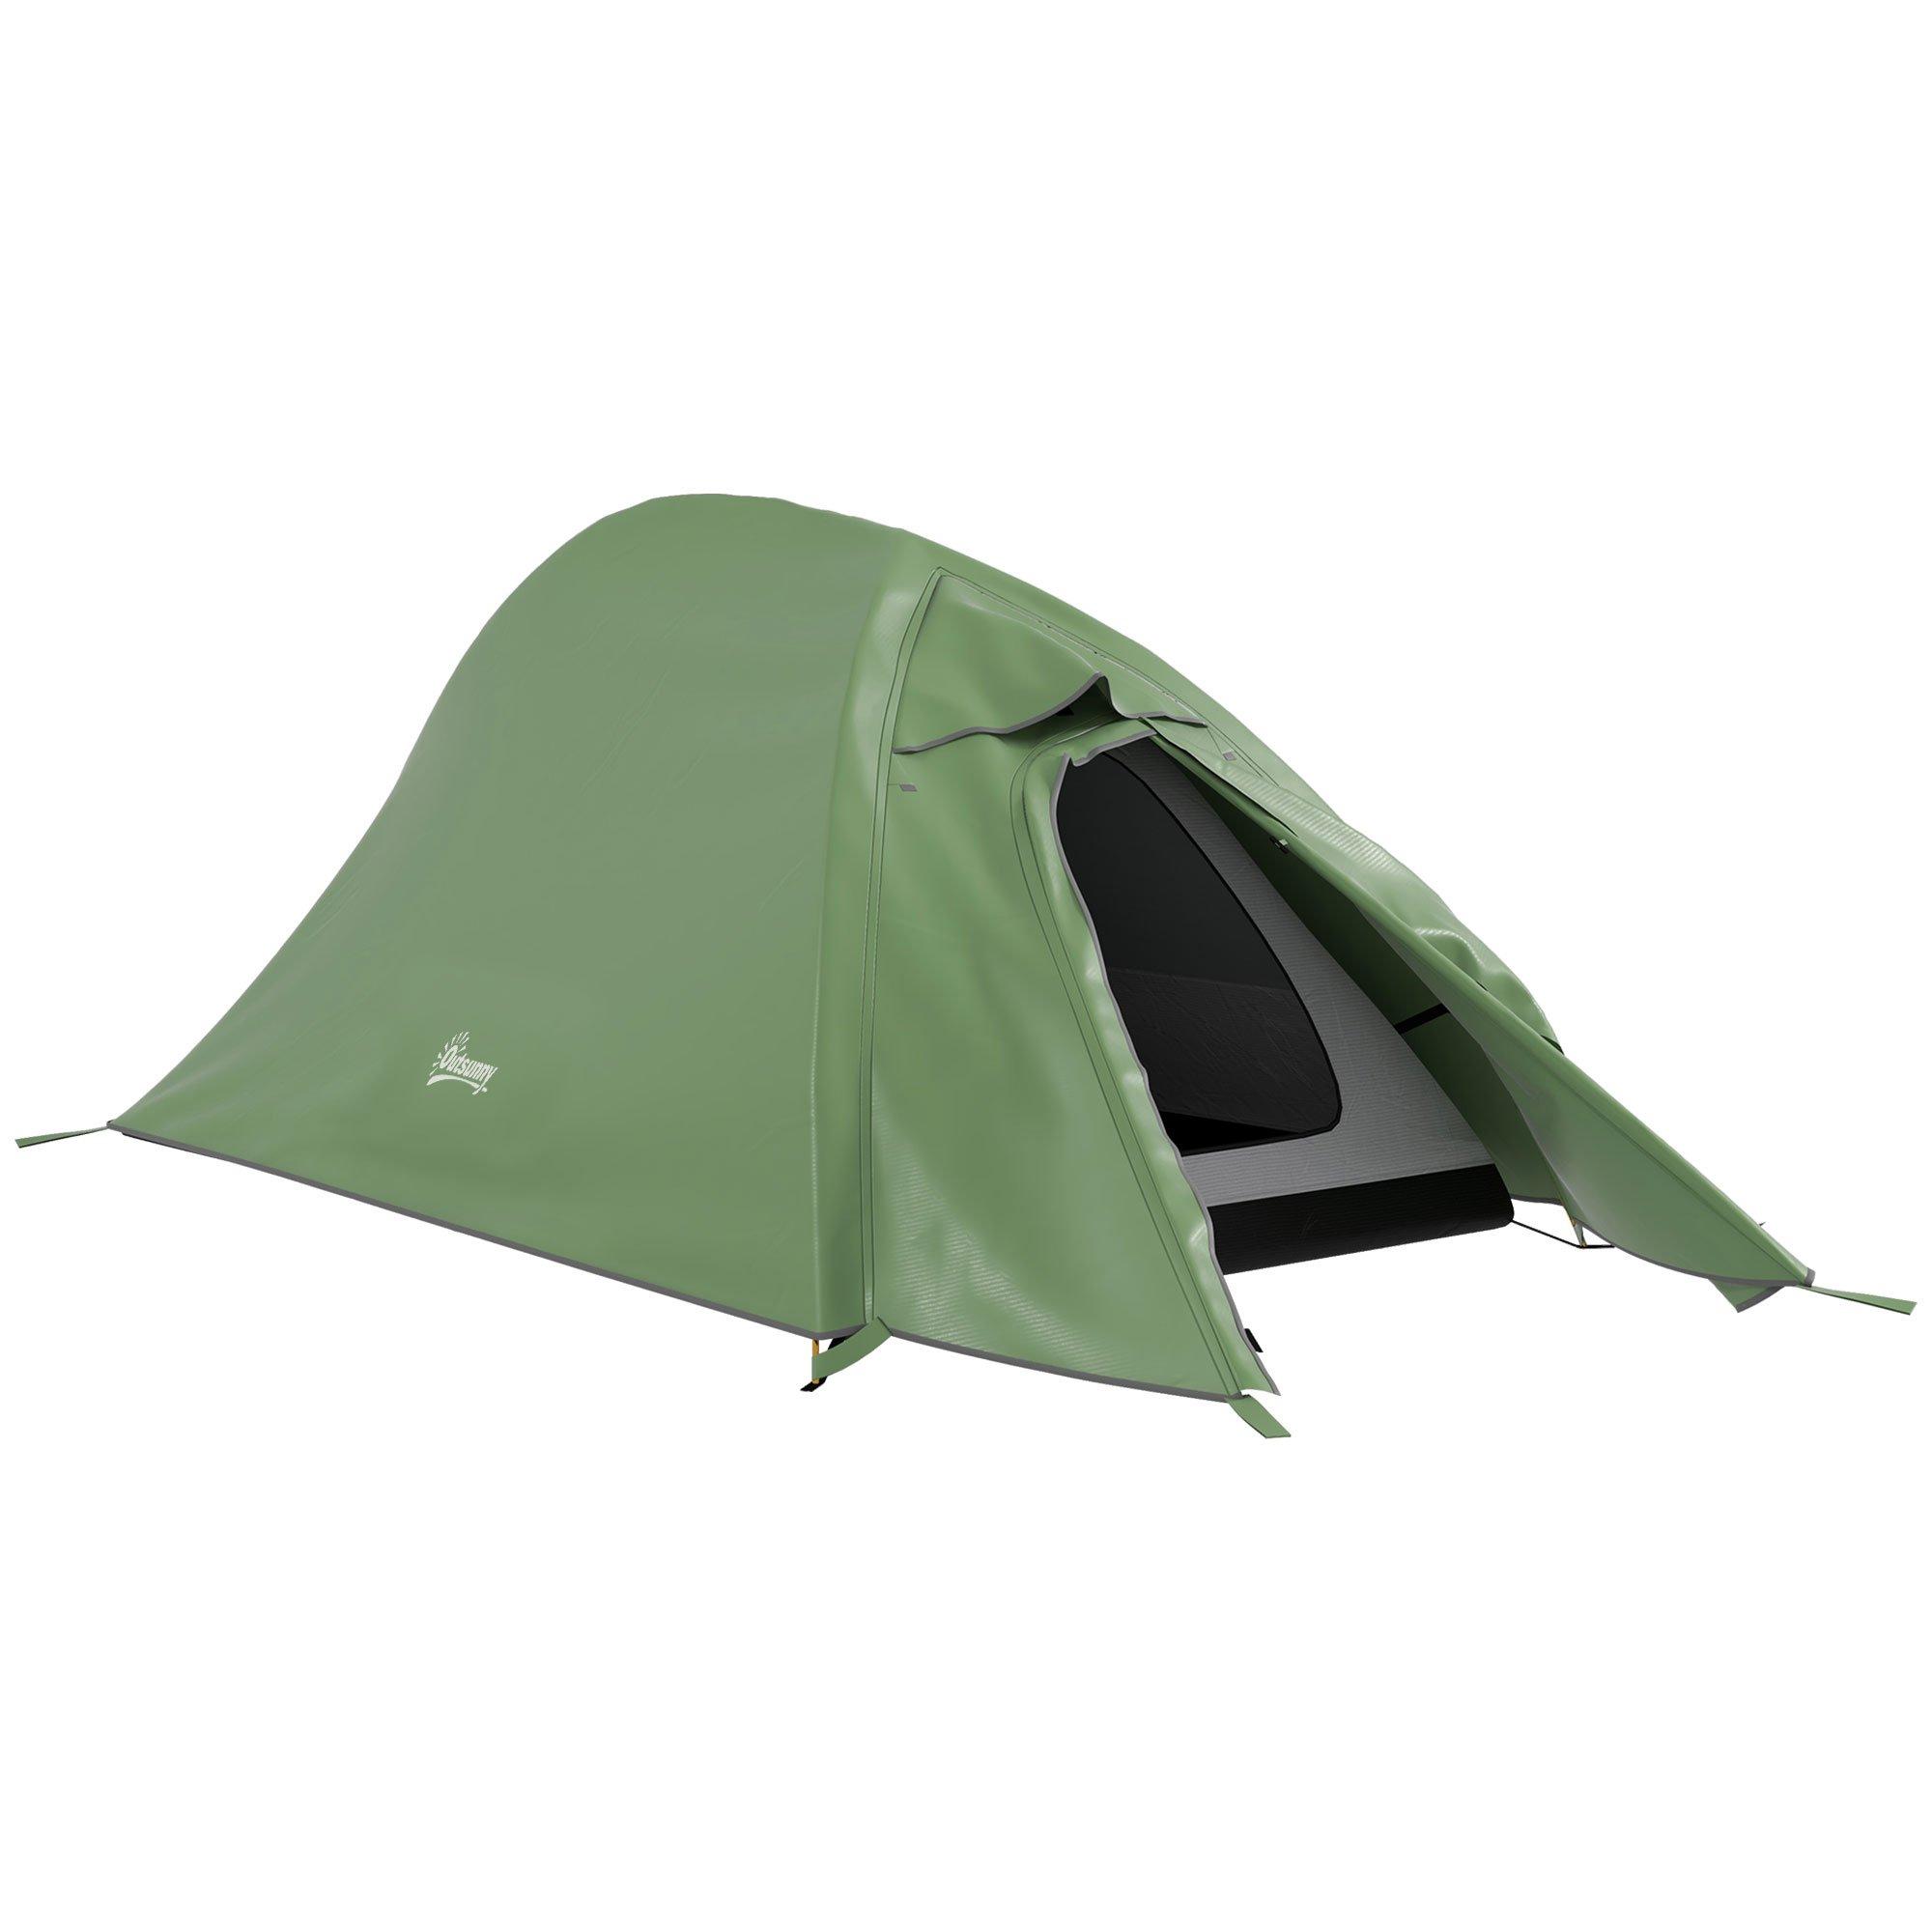 Double Layer Camping Tent for 1-2 Man, 2000mm Waterproof